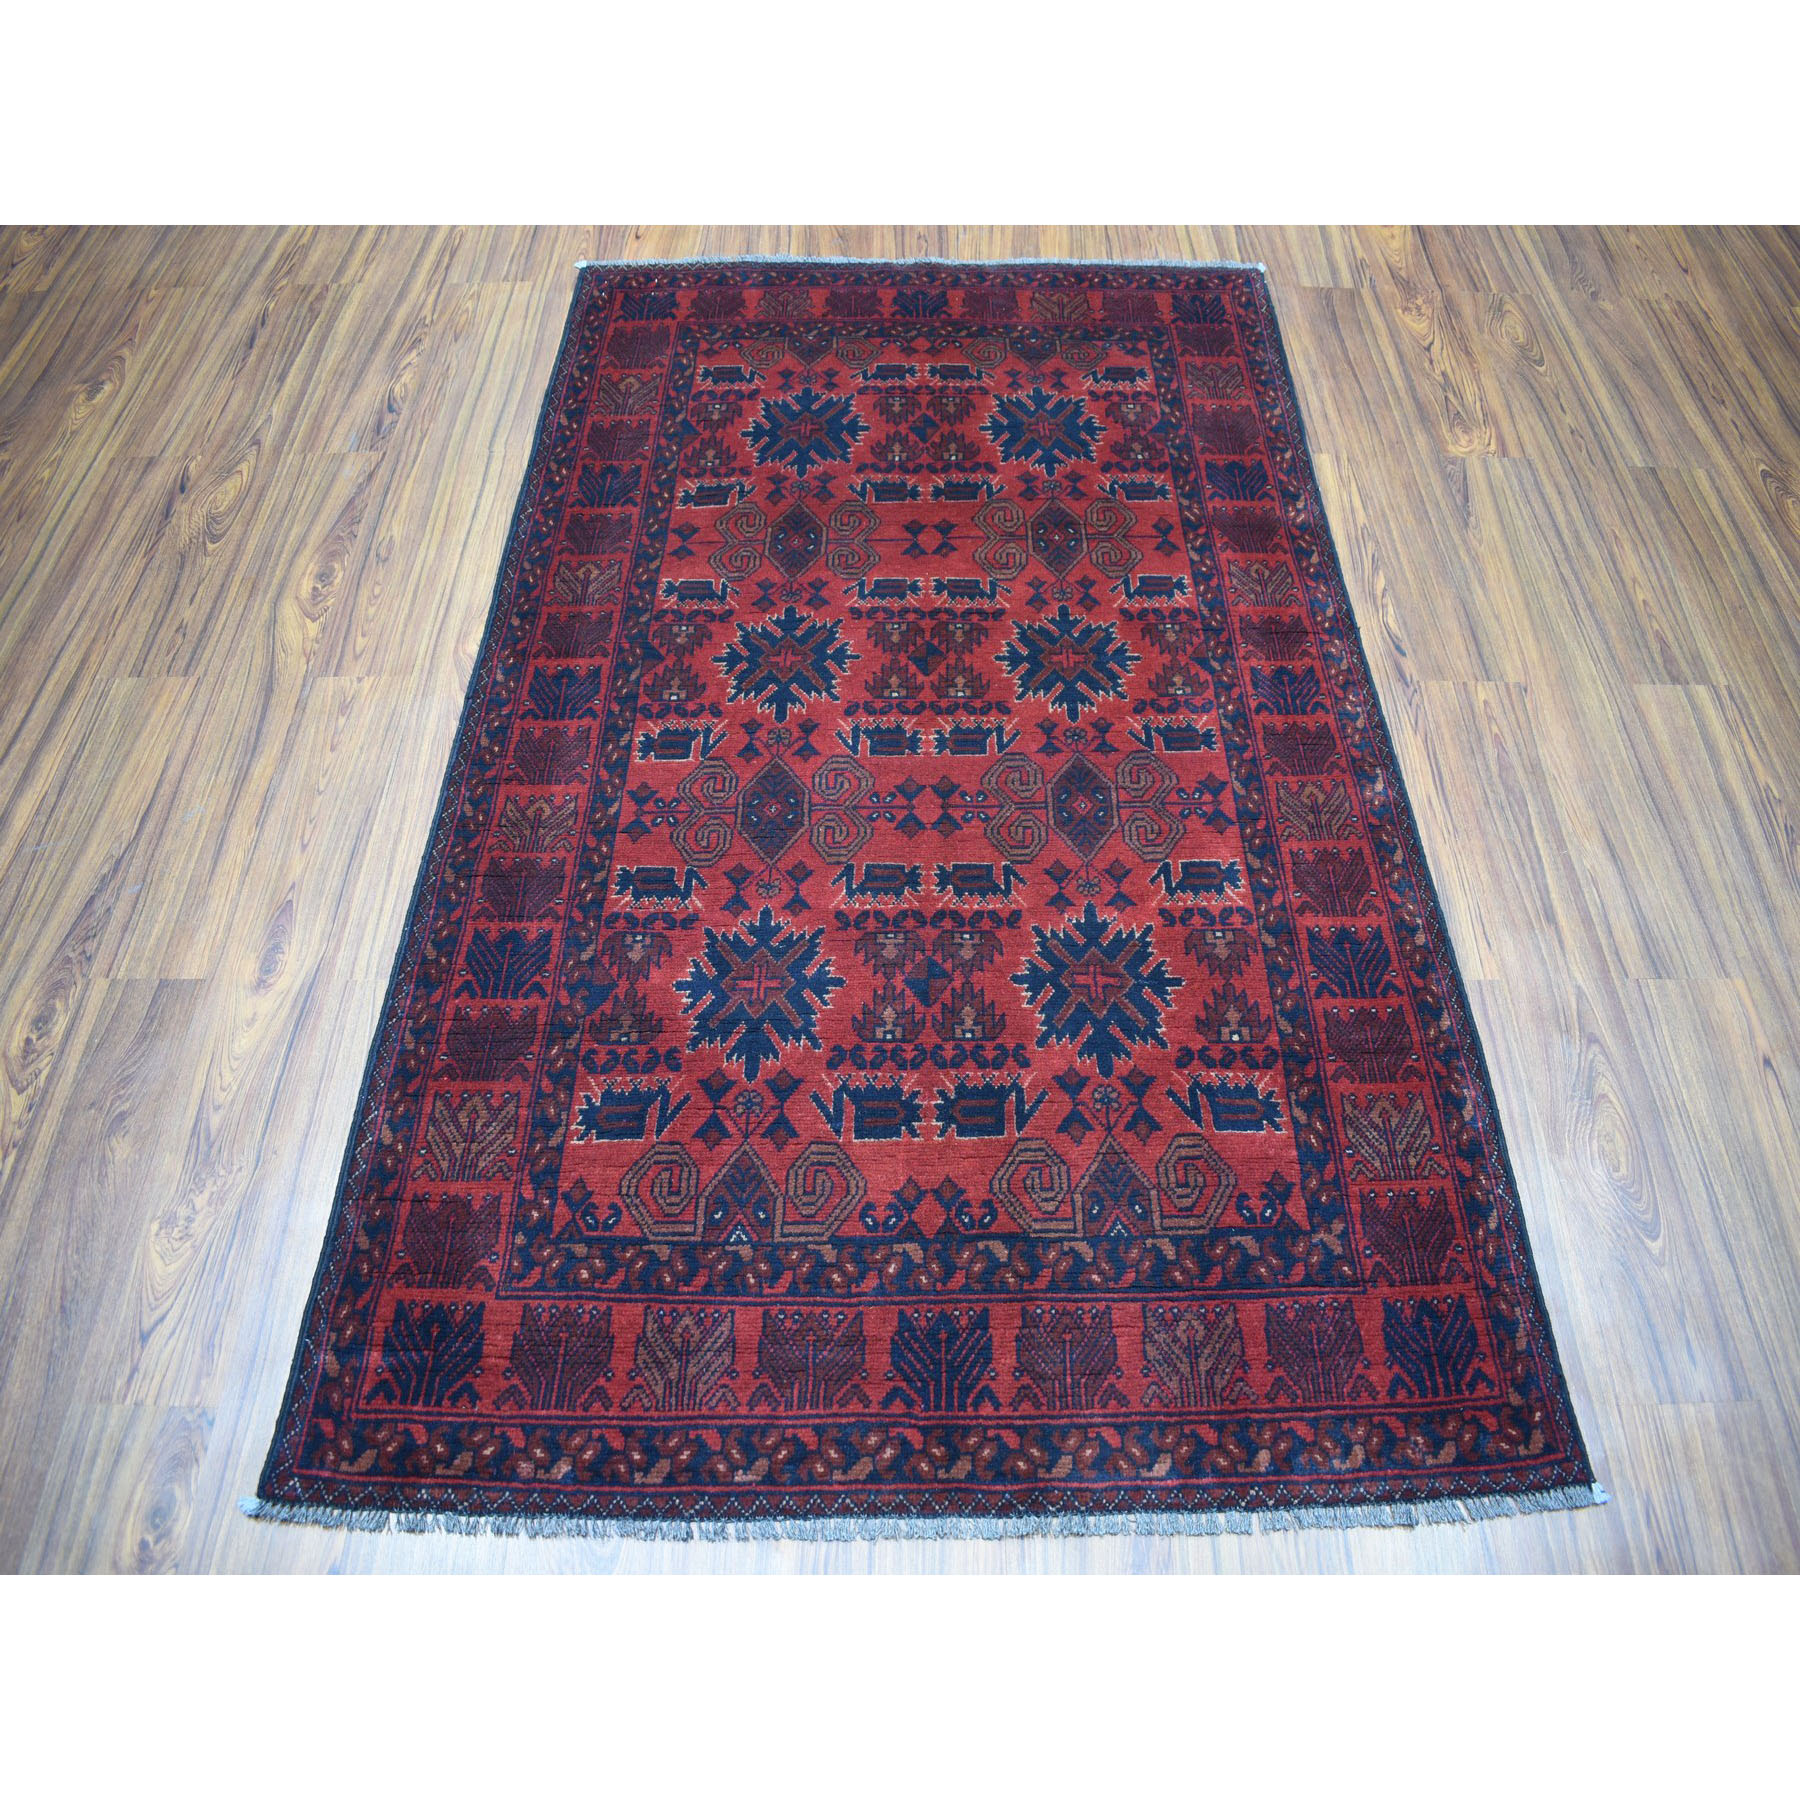 4-x6-4  Vintage Look Red Geometric Design Afghan Andkhoy Pure Wool Hand-Knotted Oriental Rug 